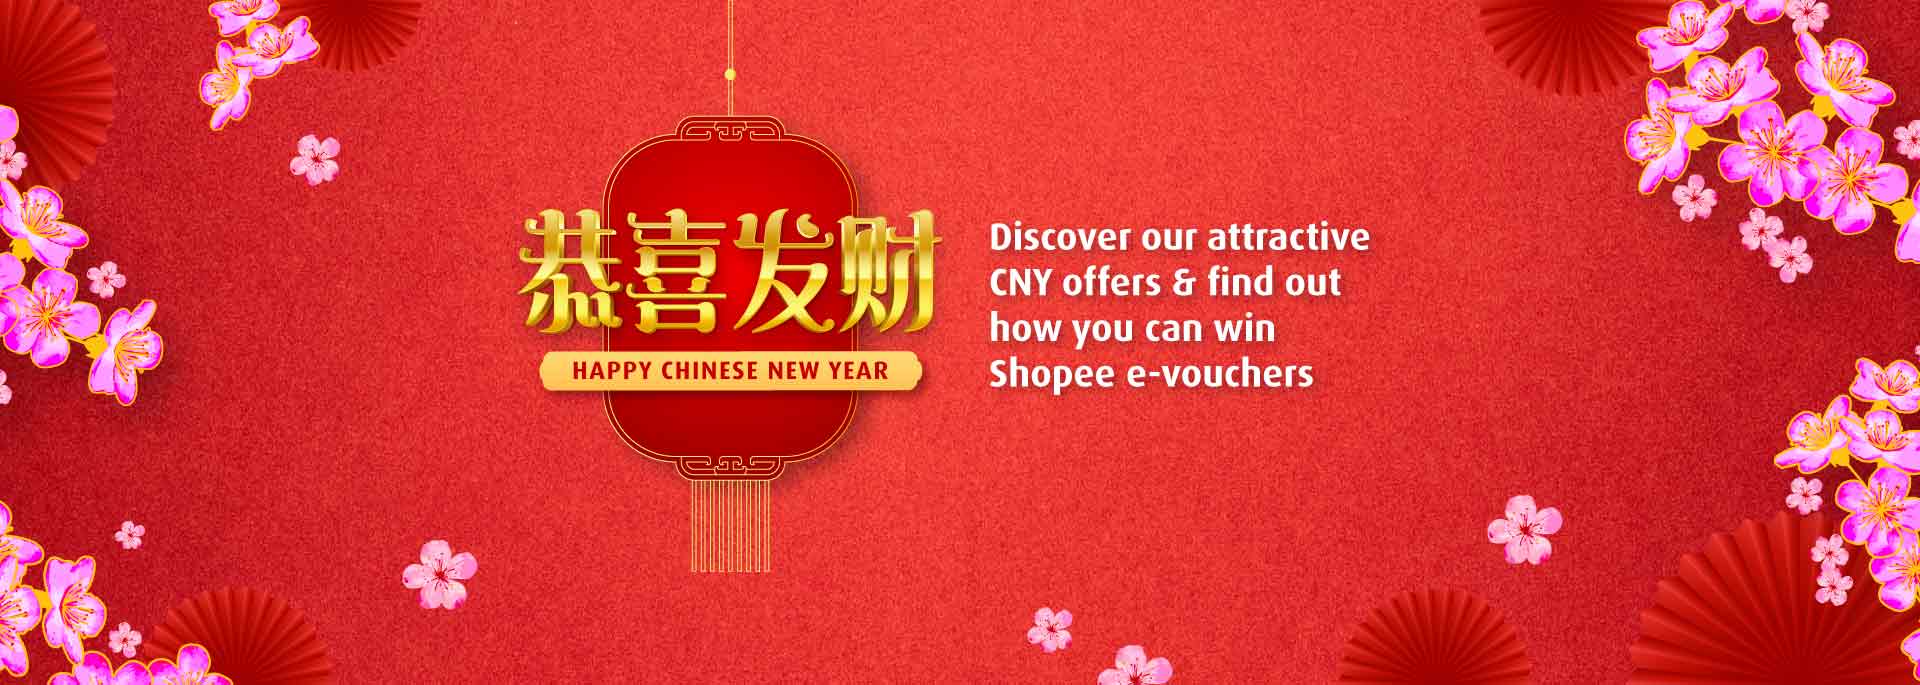 Discover our attractive CNY offers & find out how you can win Shopee e-vouchers